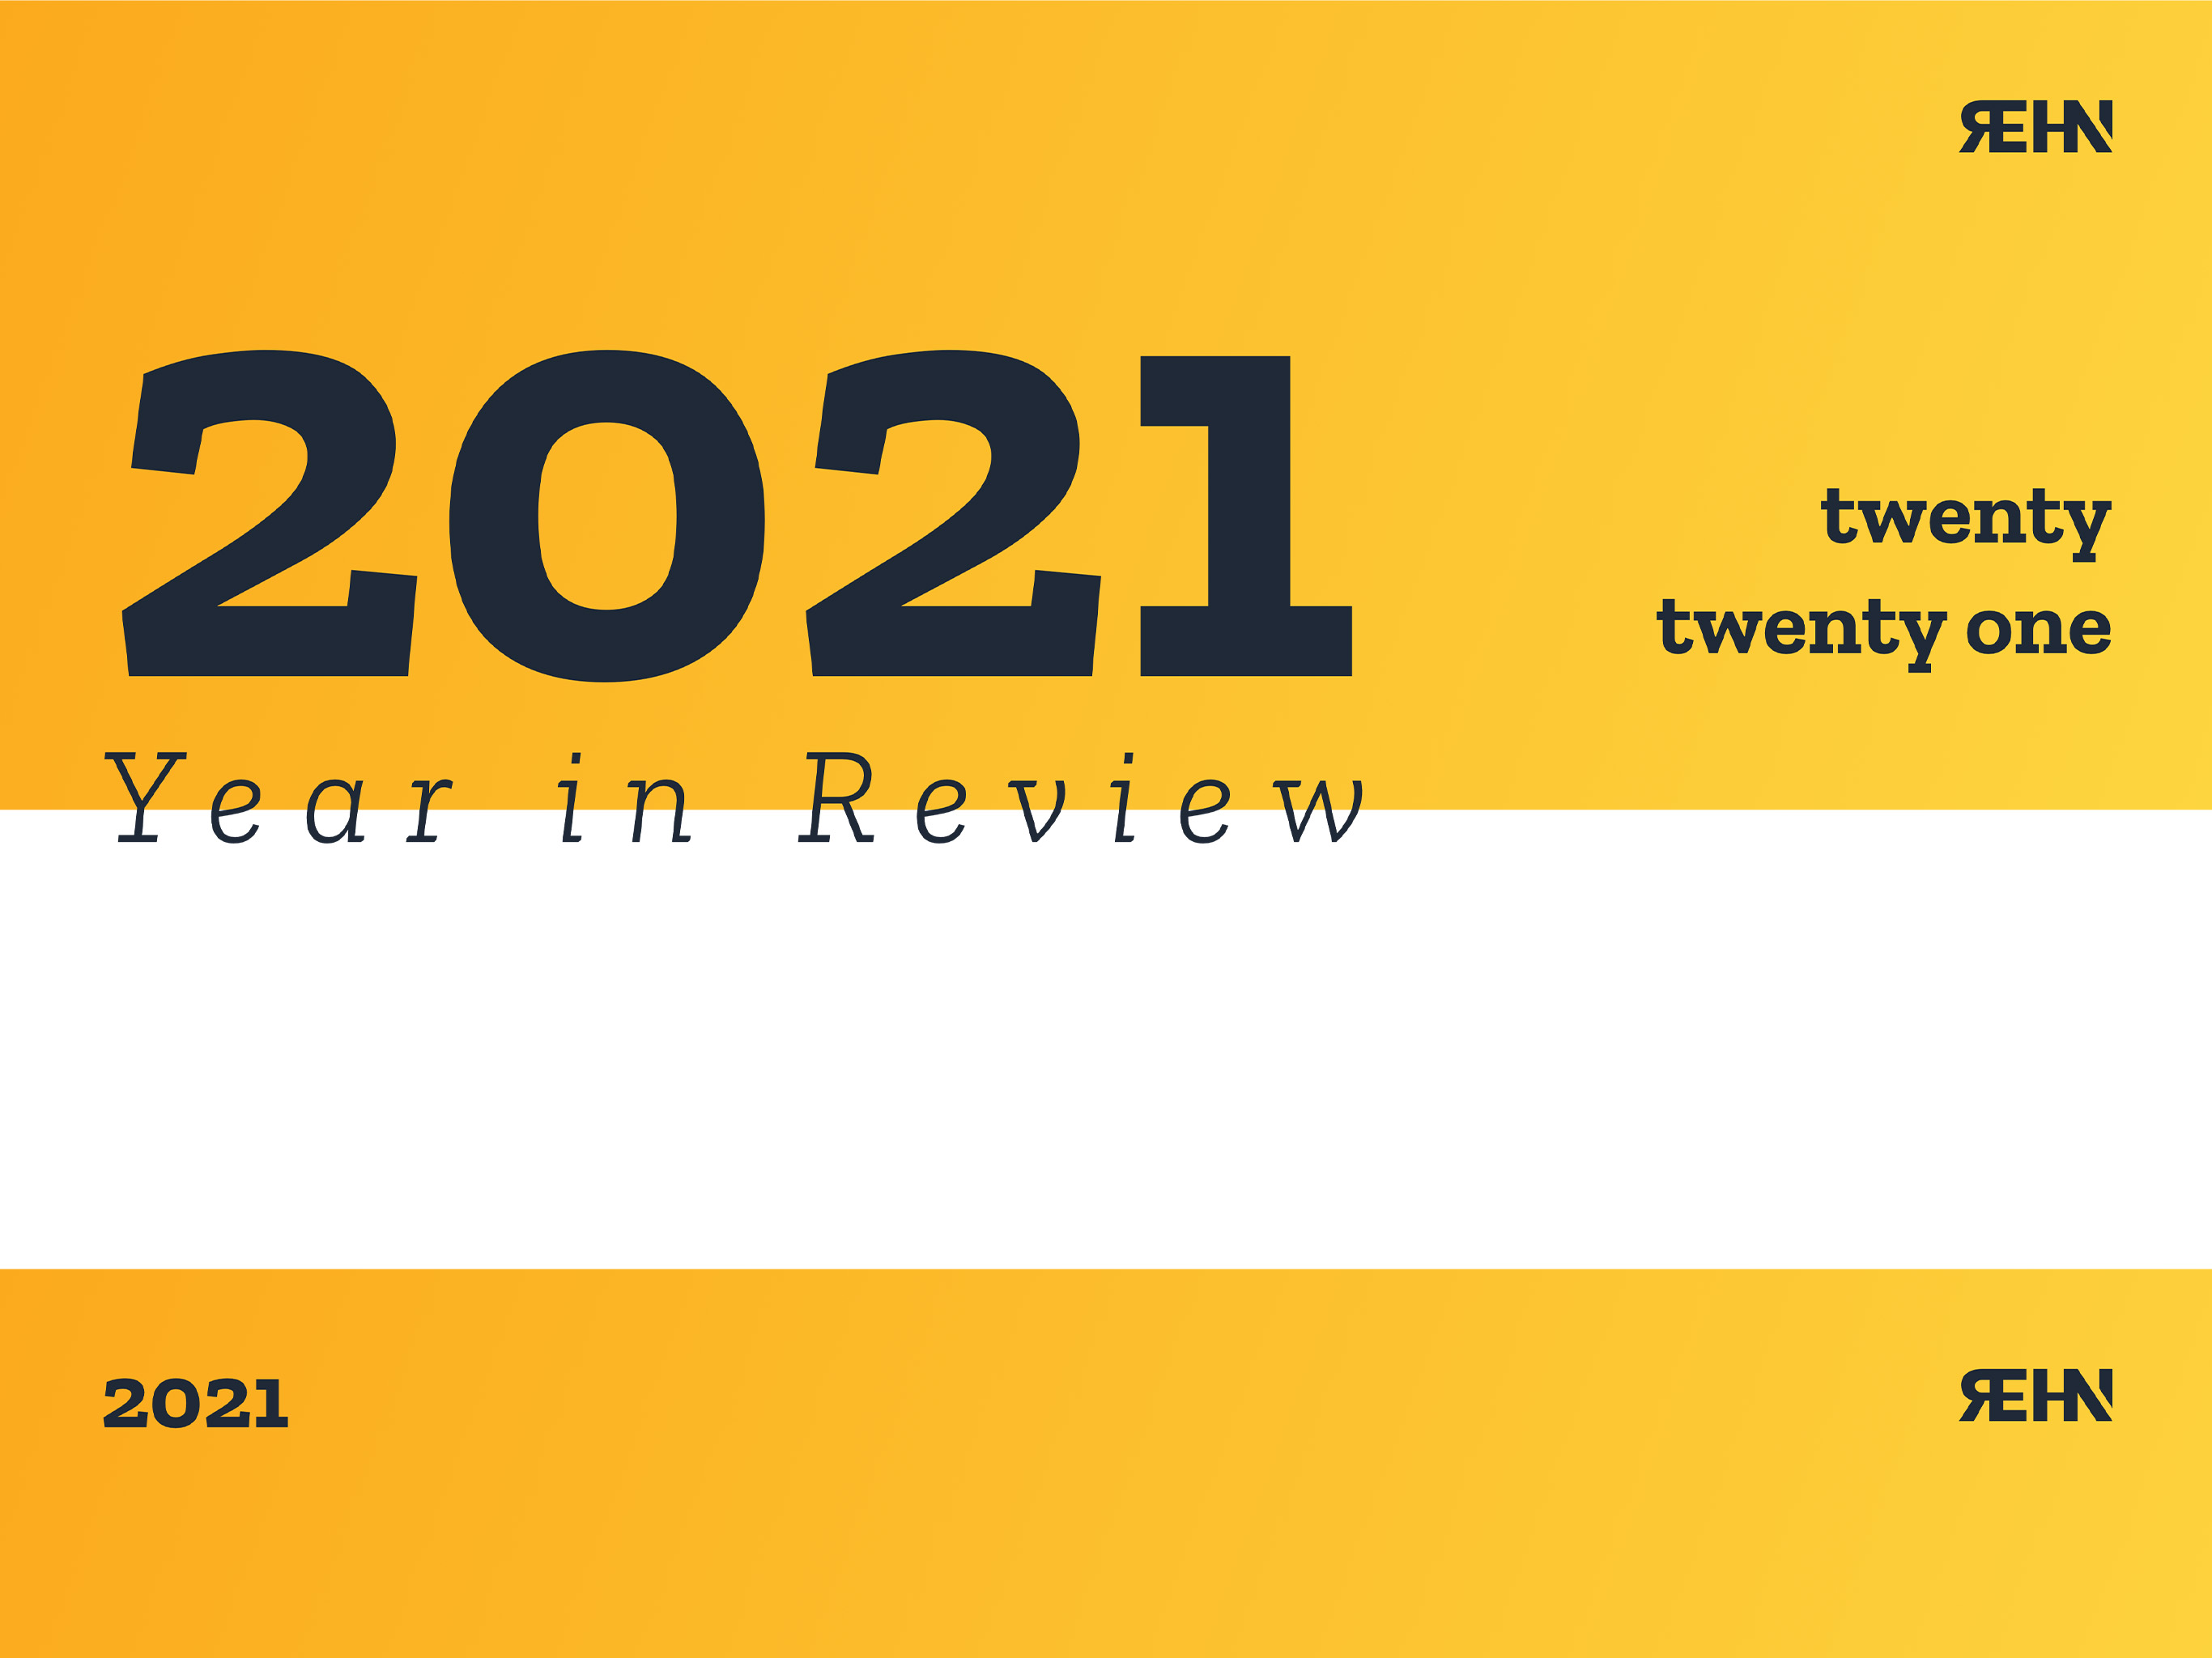 2021 header with numbering and small lettering